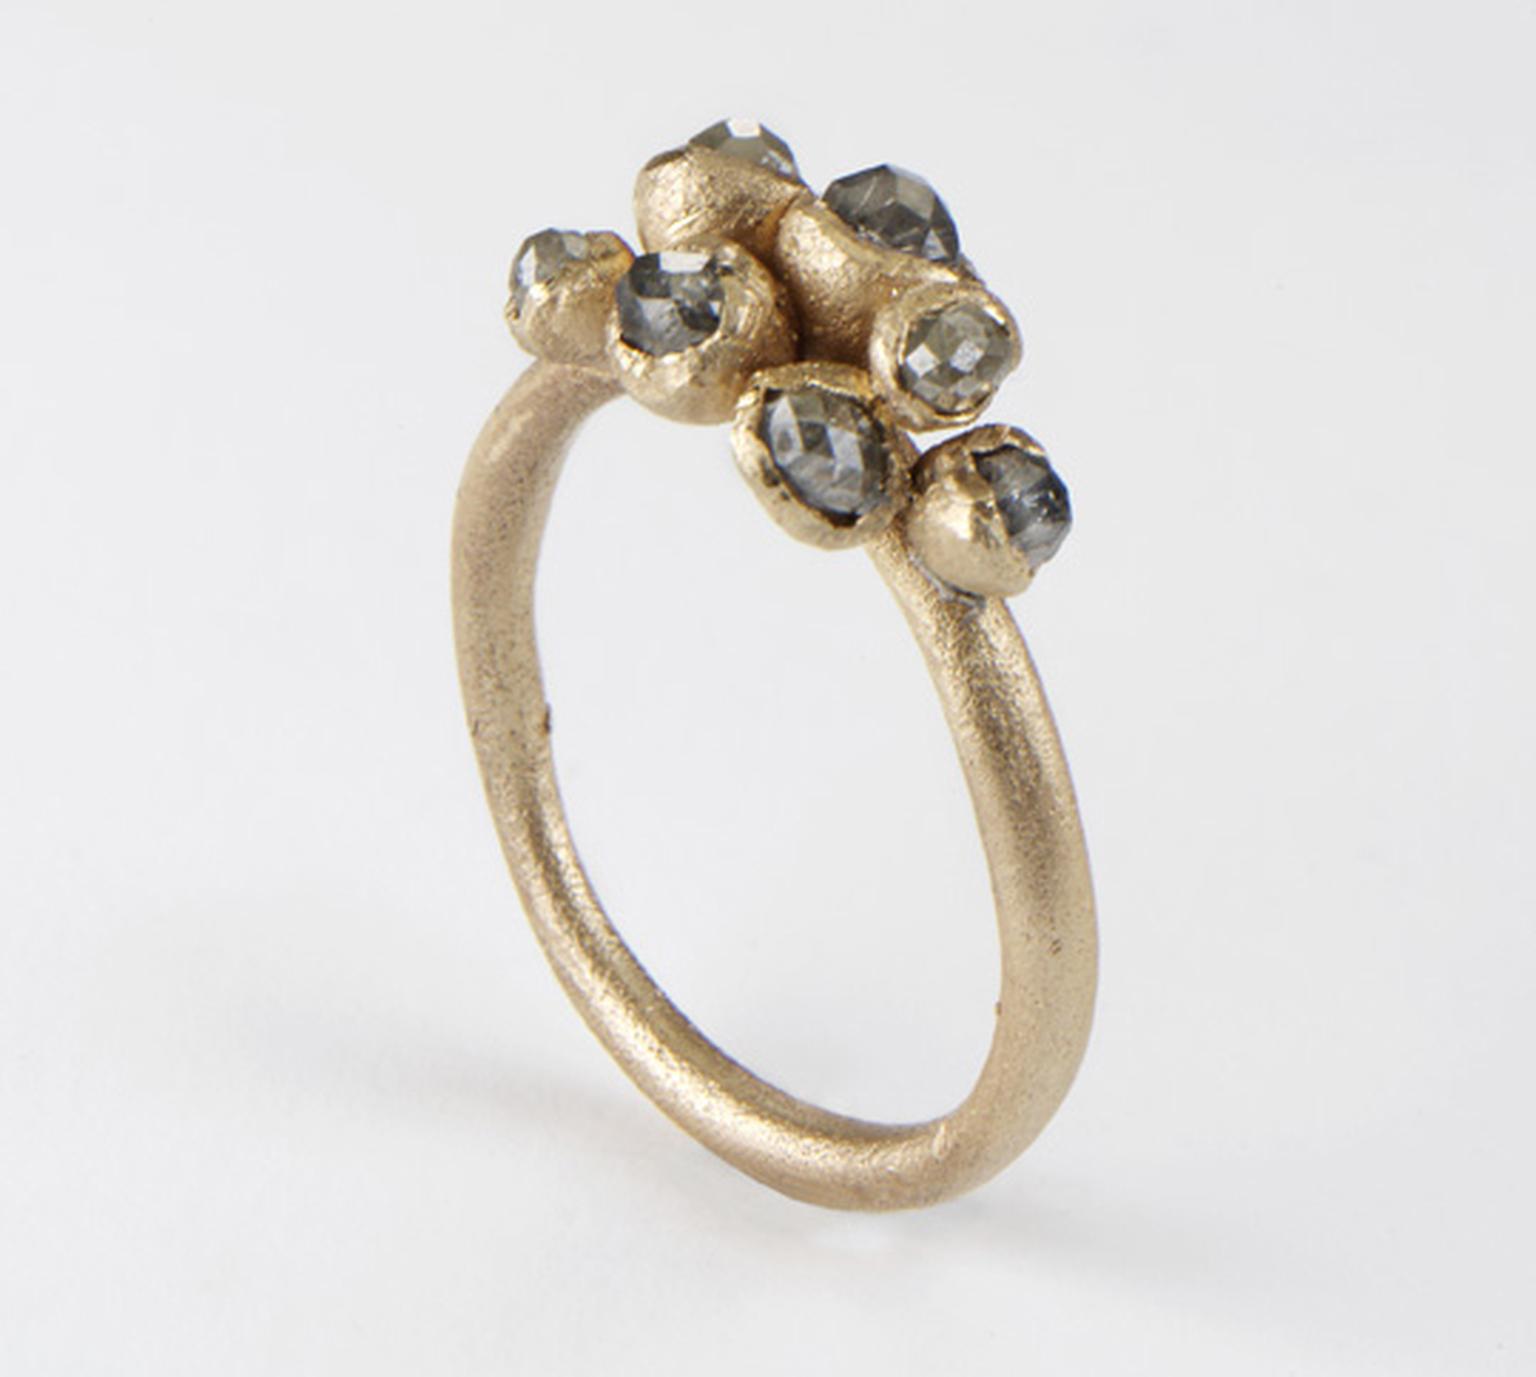 Ruth Tomlinson Grey Cluster Diamond ring in 9ct yellow gold, set with grey natural diamonds (from £1,300)